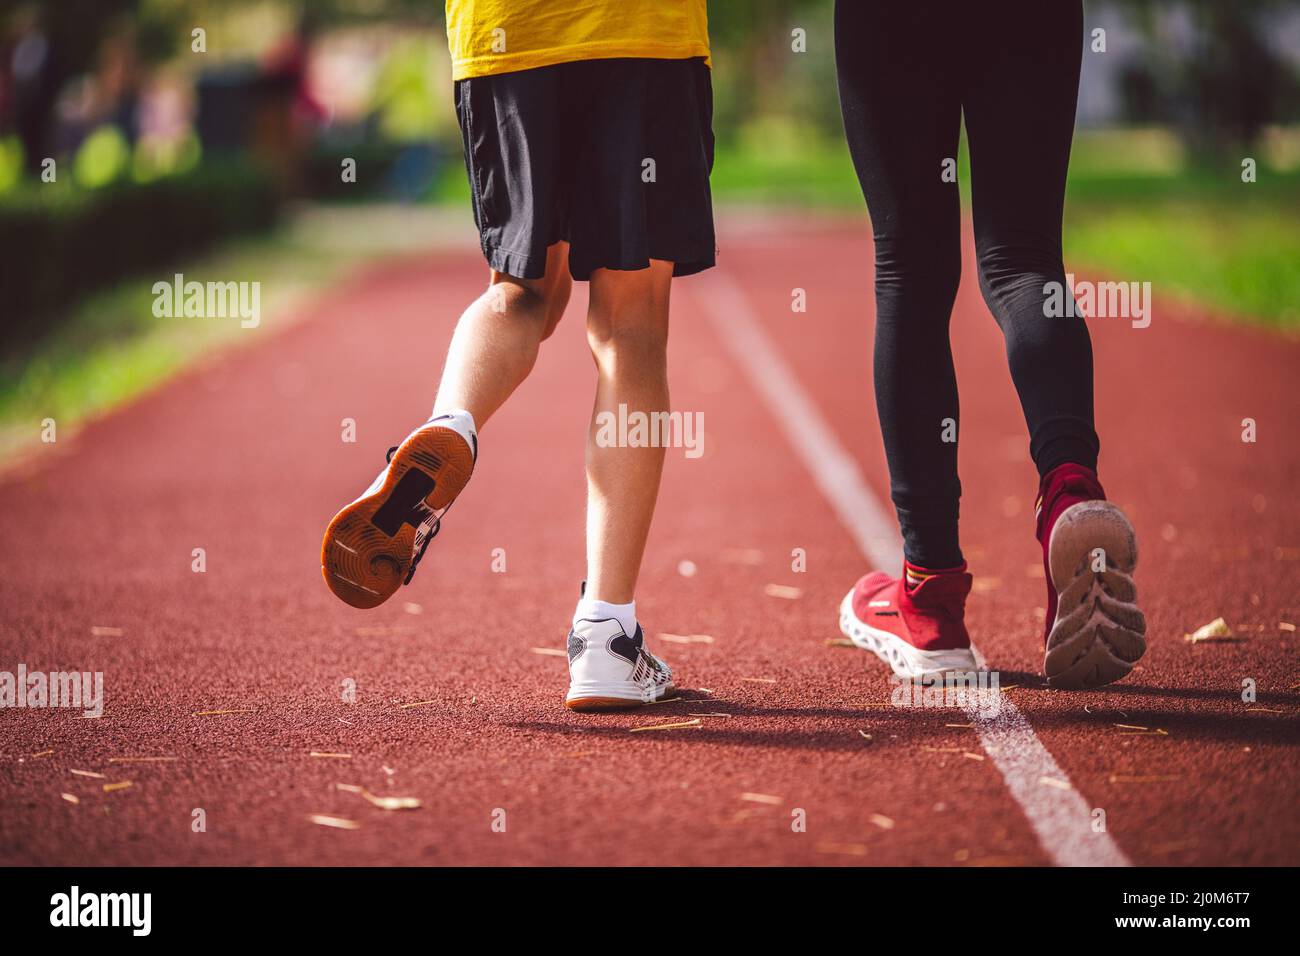 Close-up of legs in sneakers of two children on running track of stadium, back view. Boy and girl on red jogging track in park r Stock Photo